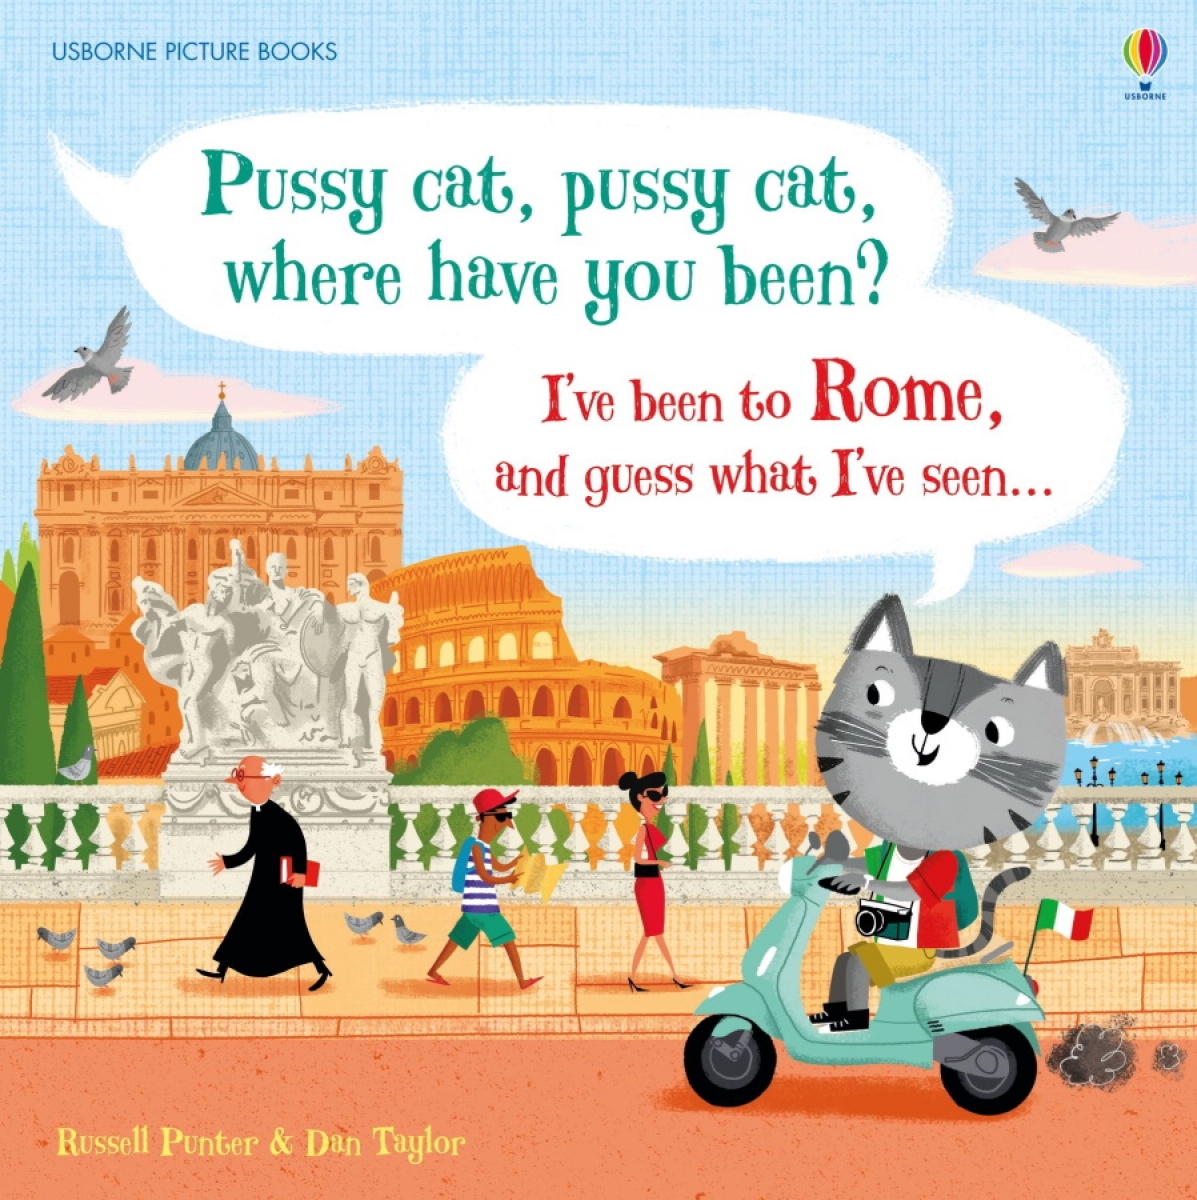 Russell Punter Pussy cat, pussy cat, where have you been? I've been to Rome and guess what I've seen... 